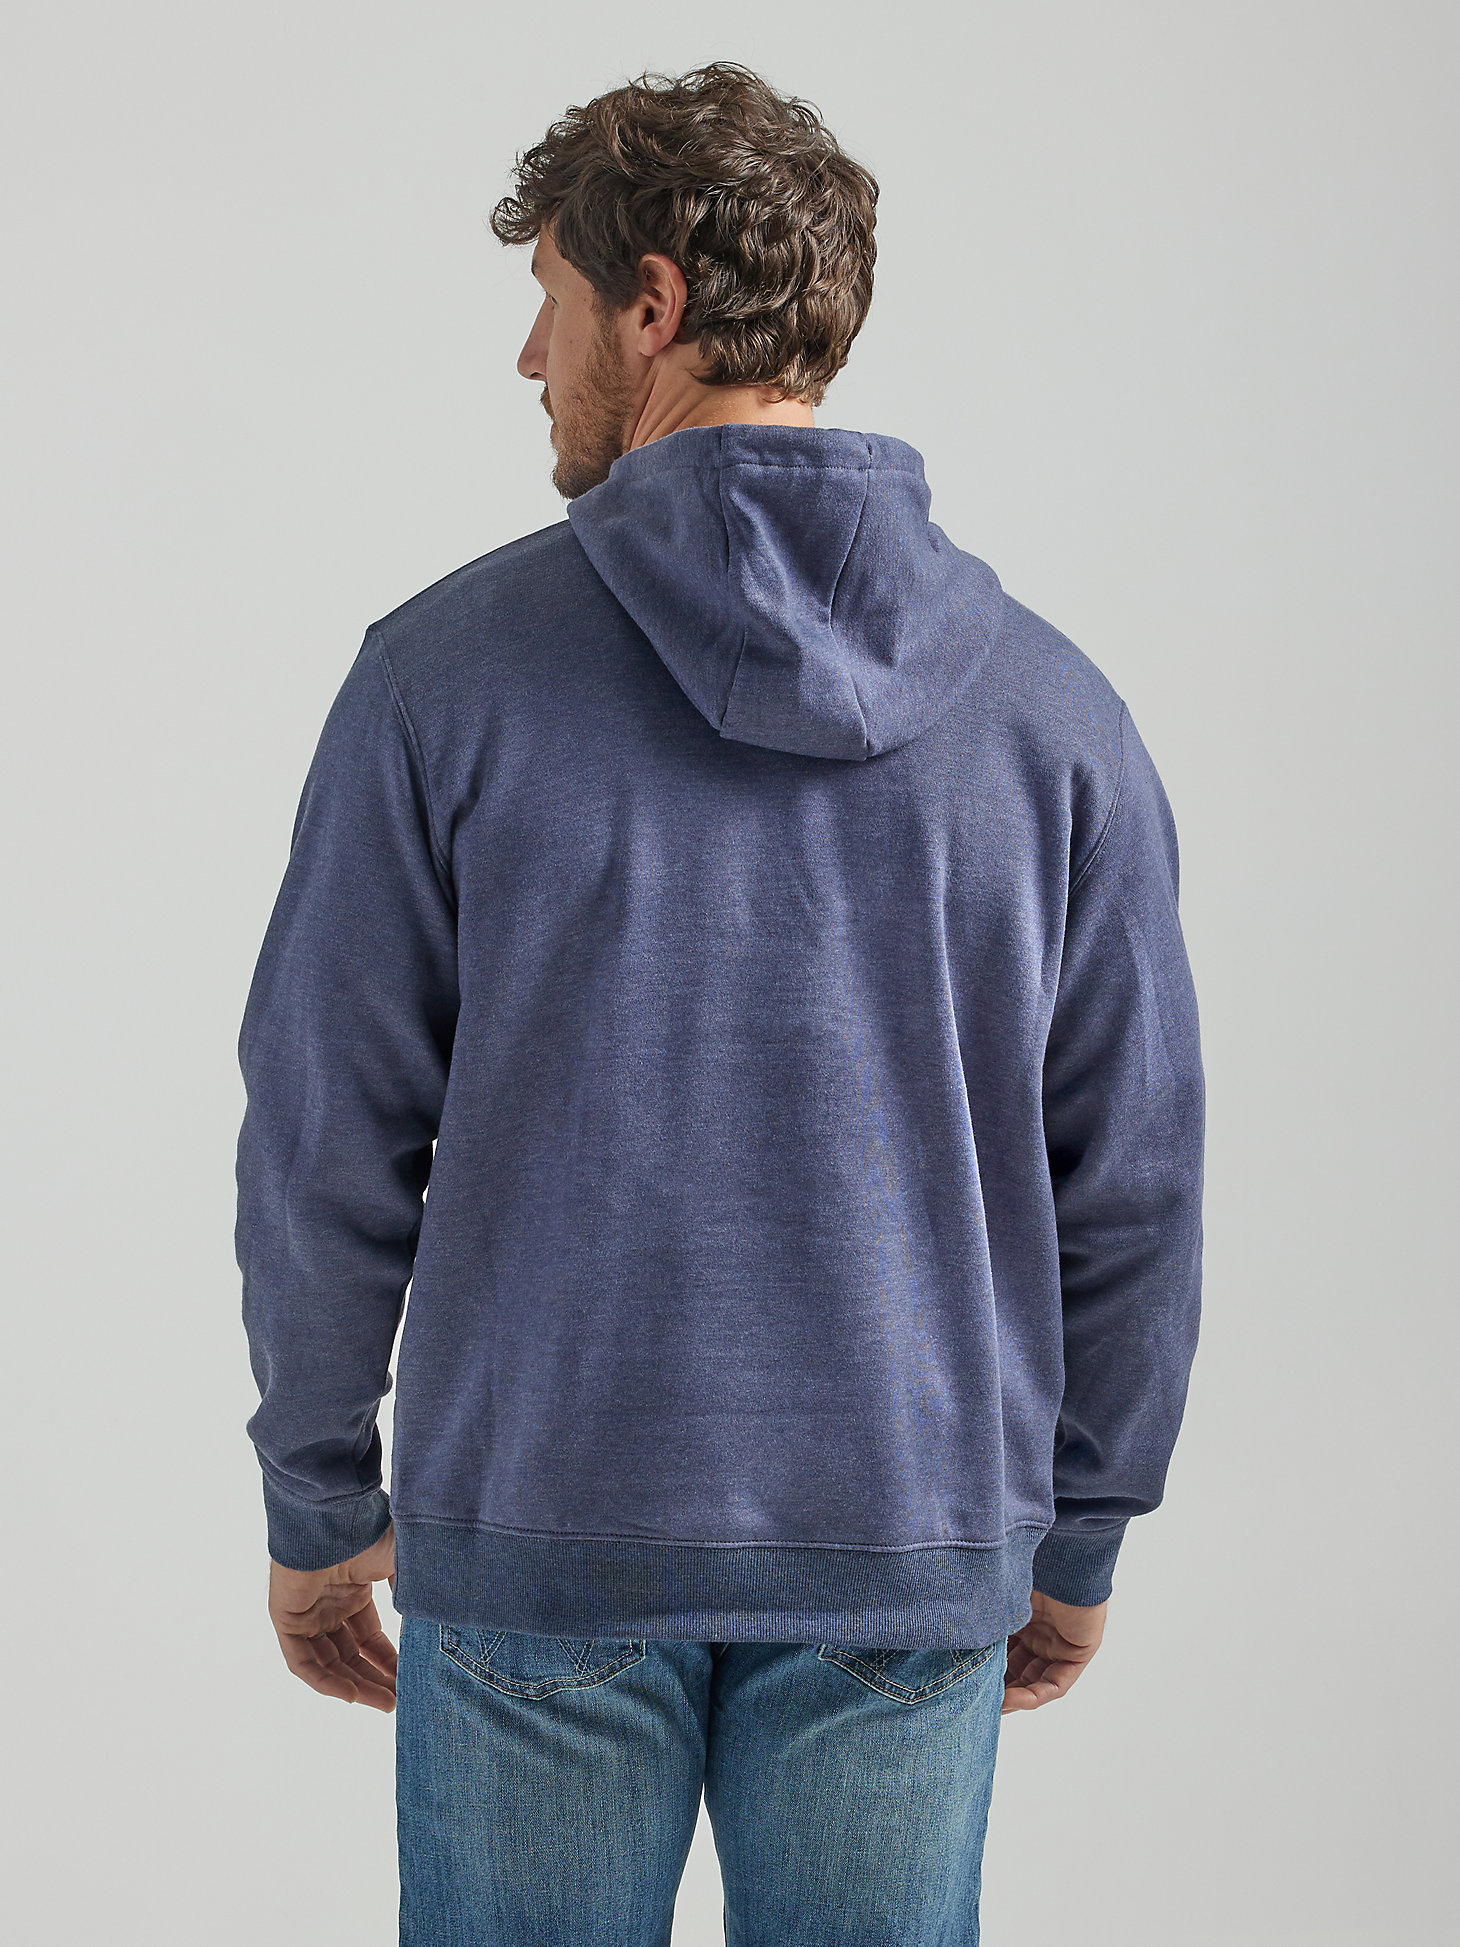 Men's George Strait Out Of Texas Hoodie in Navy Heather alternative view 2